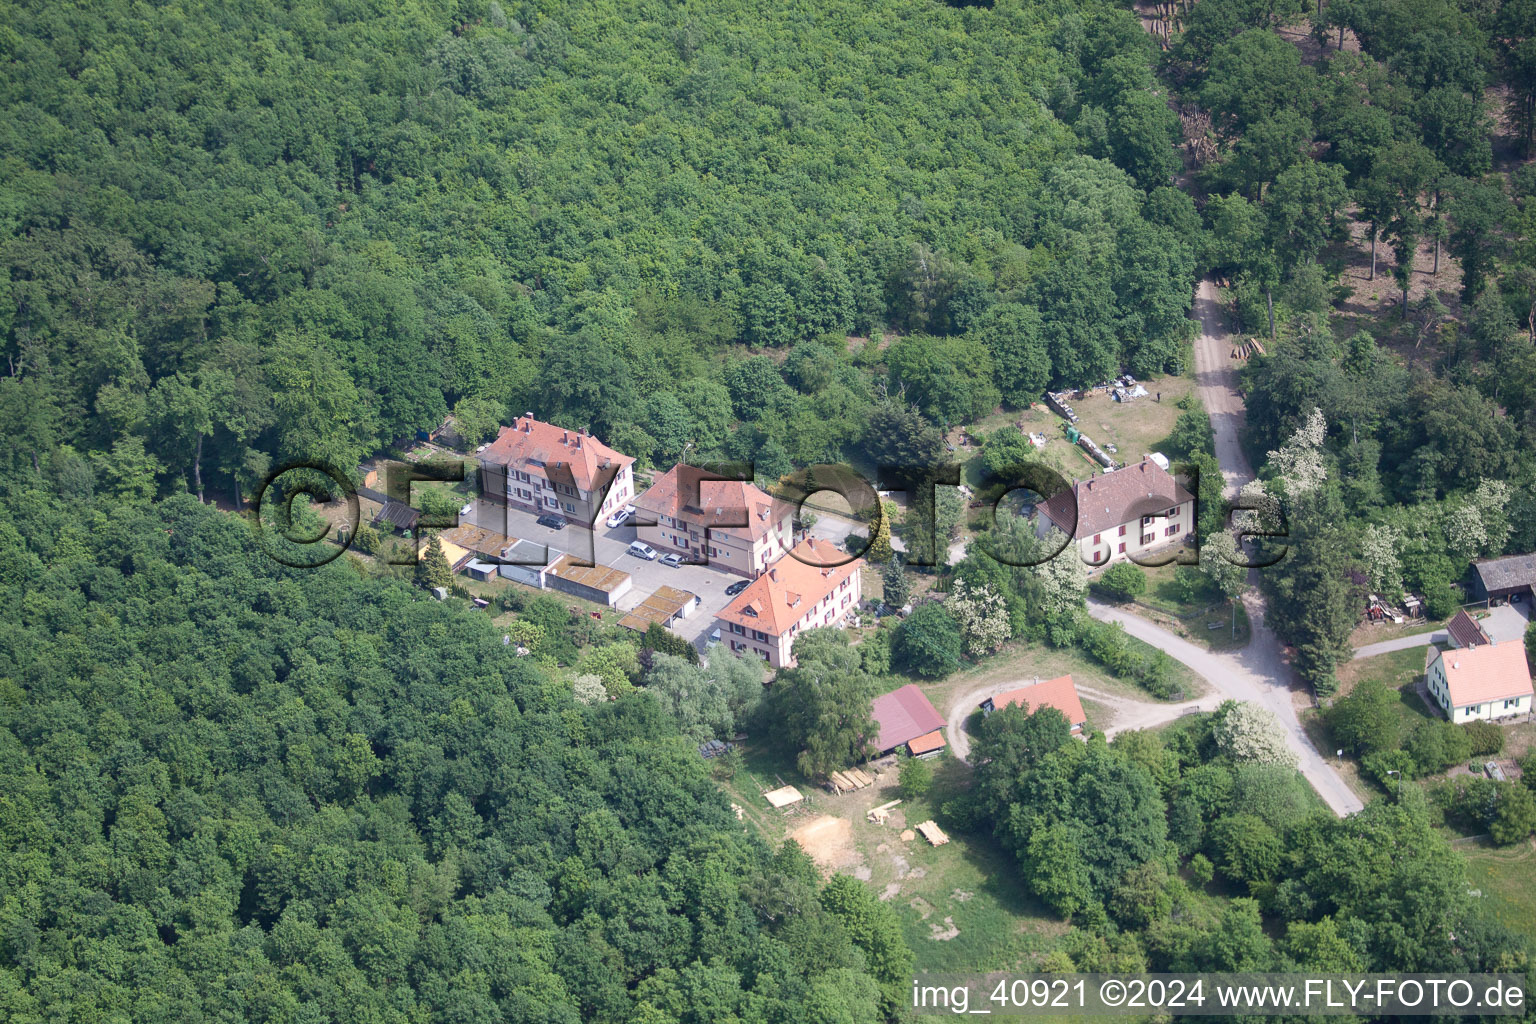 Aerial view of (Palatinate), Seufzerallee 4 in Scheibenhardt in the state Rhineland-Palatinate, Germany